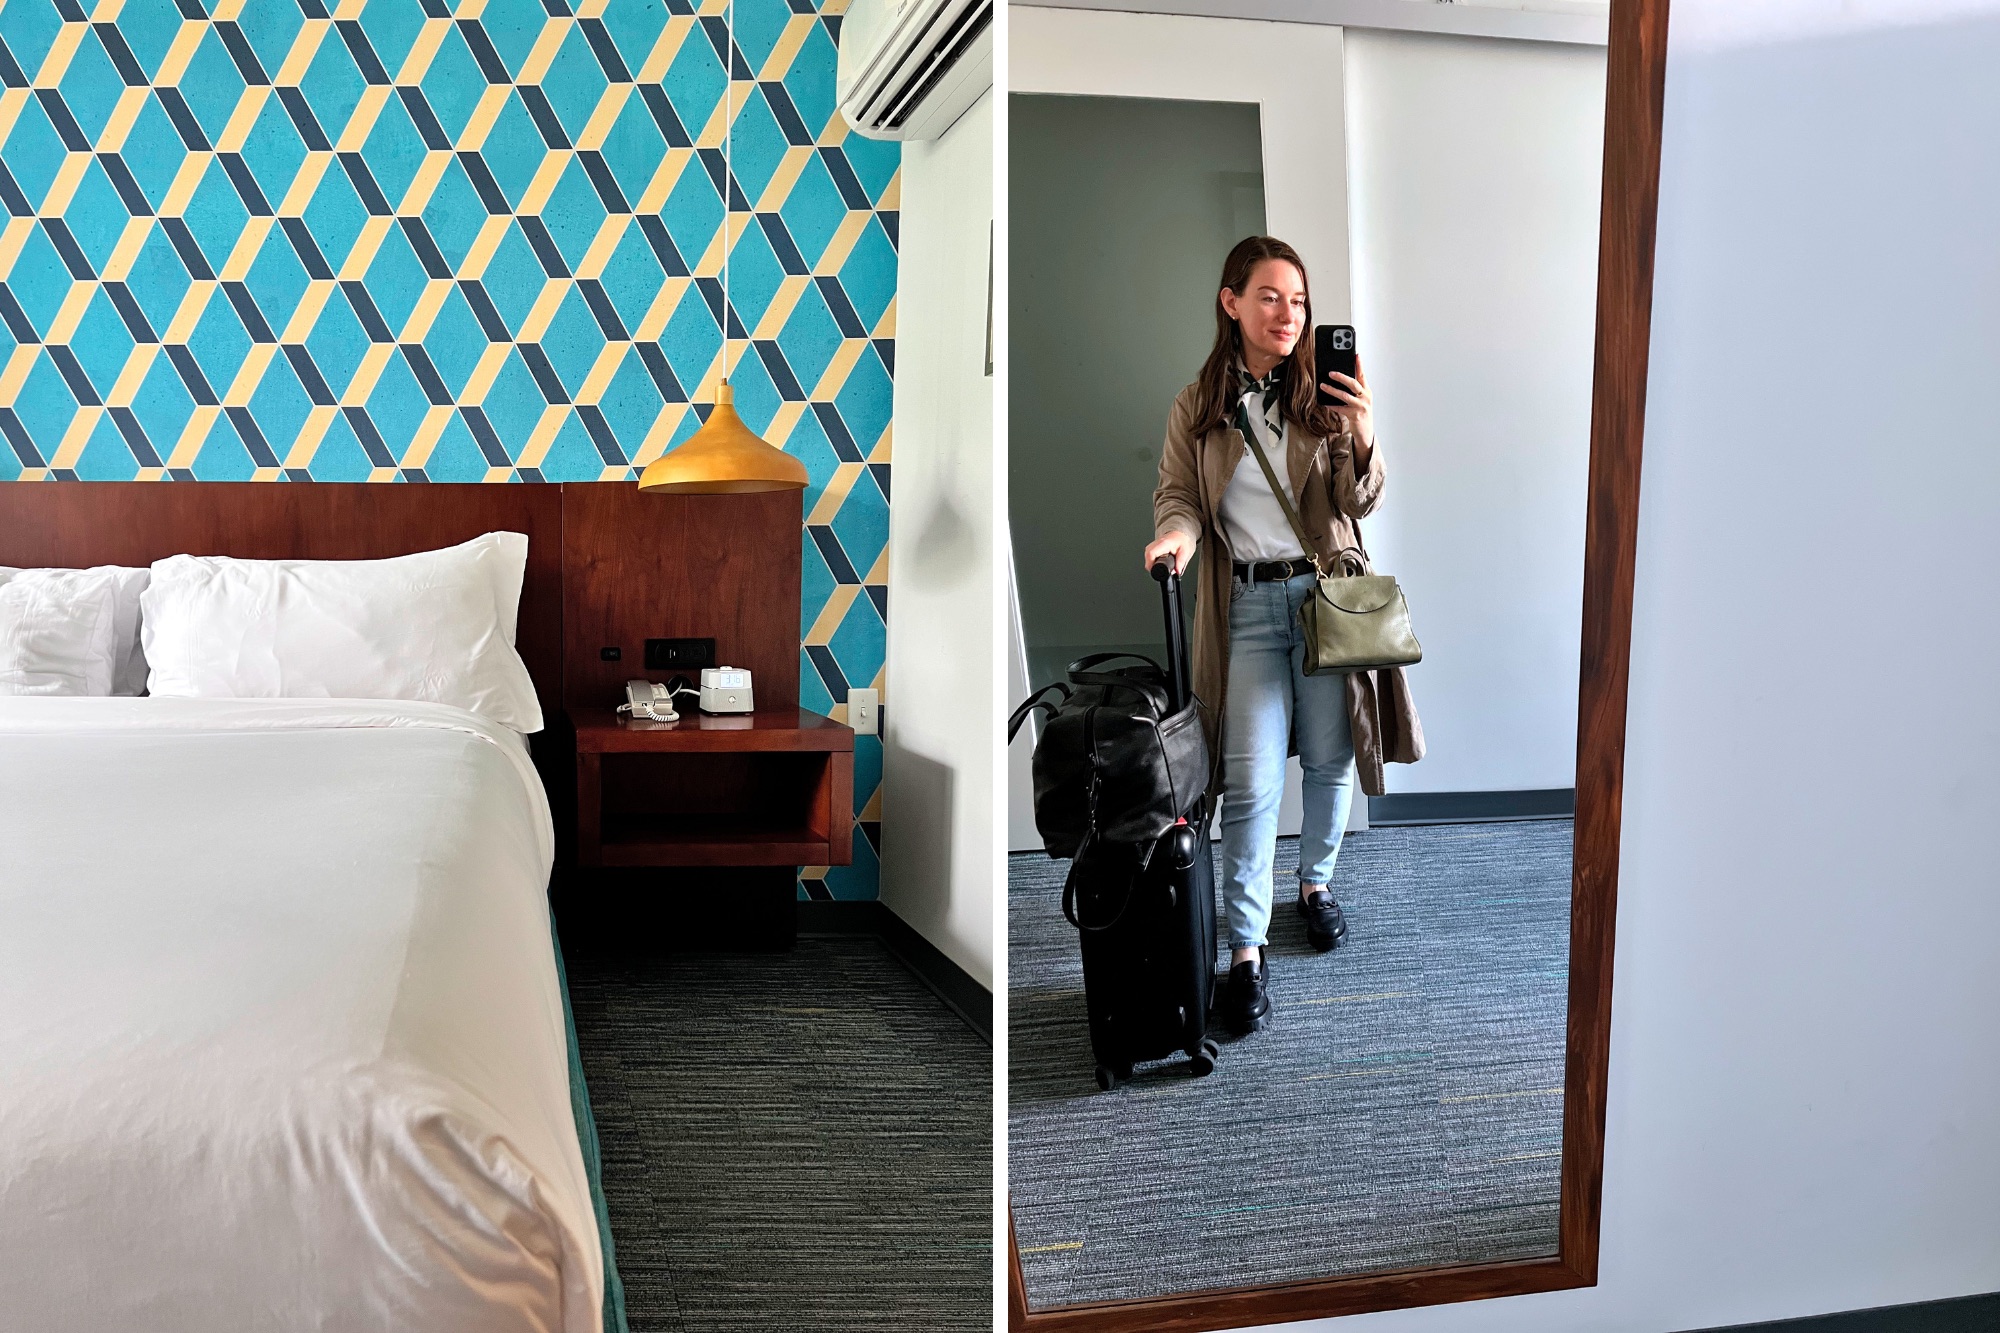 Two images: the King bed and Alyssa taking a mirror selfie